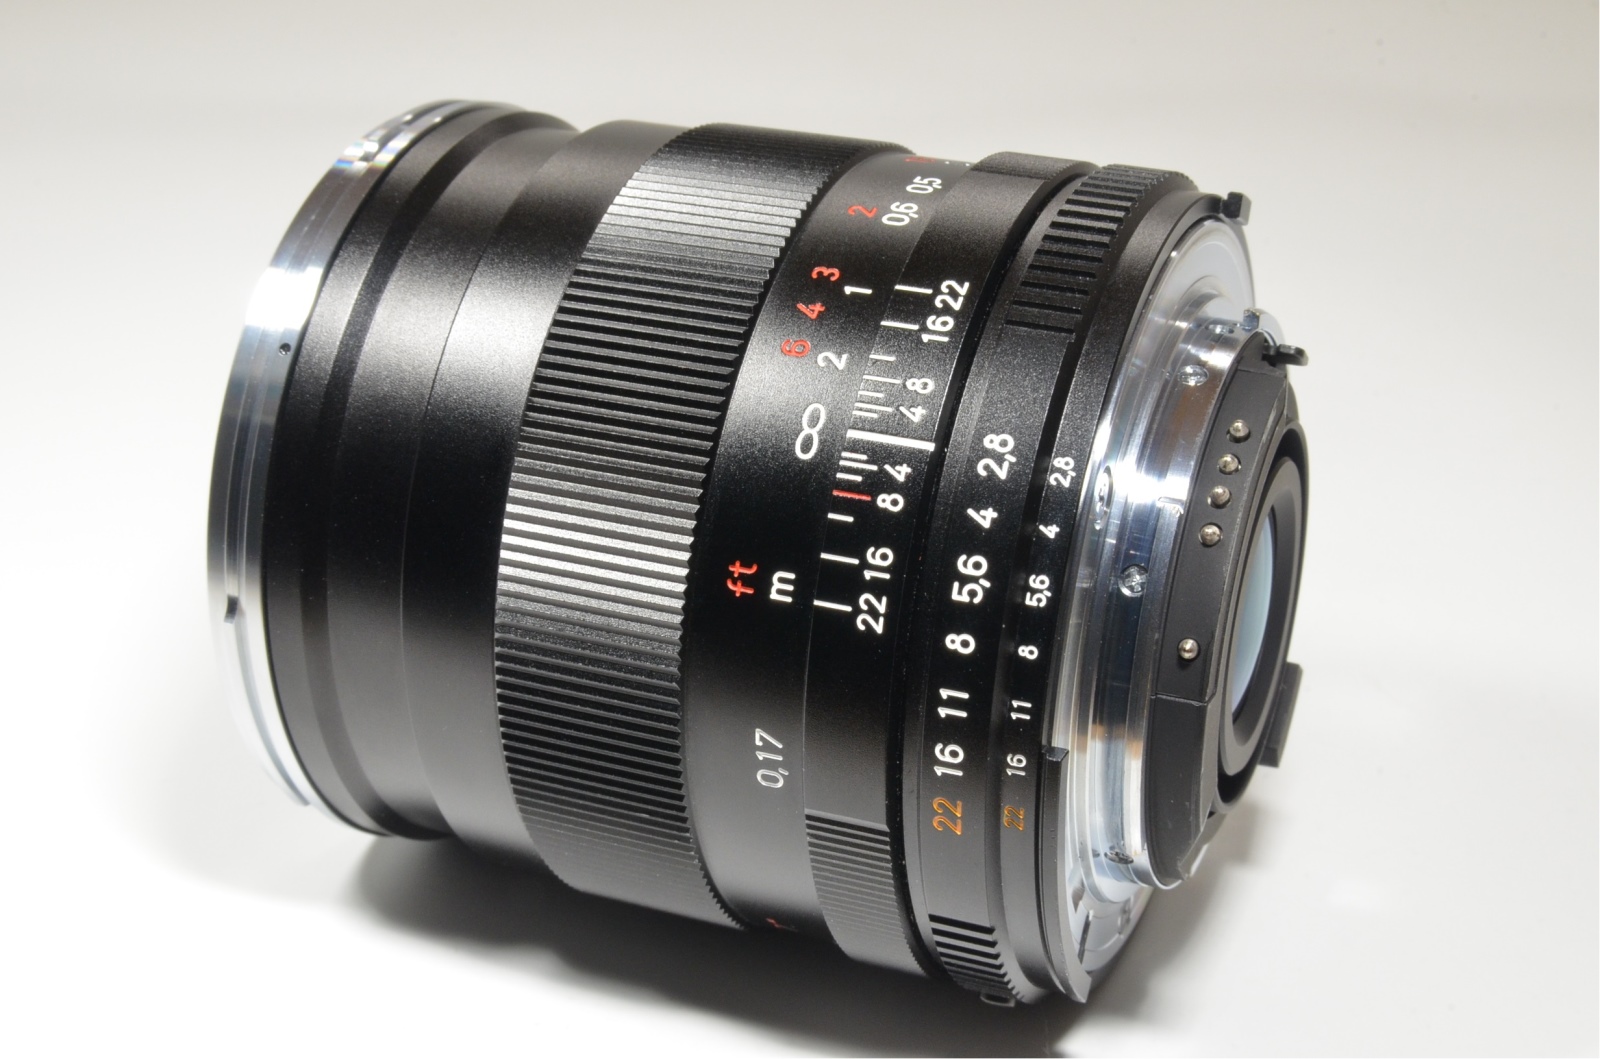 carl zeiss distagon t* 25mm f2.8 zf.2 for nikon from japan